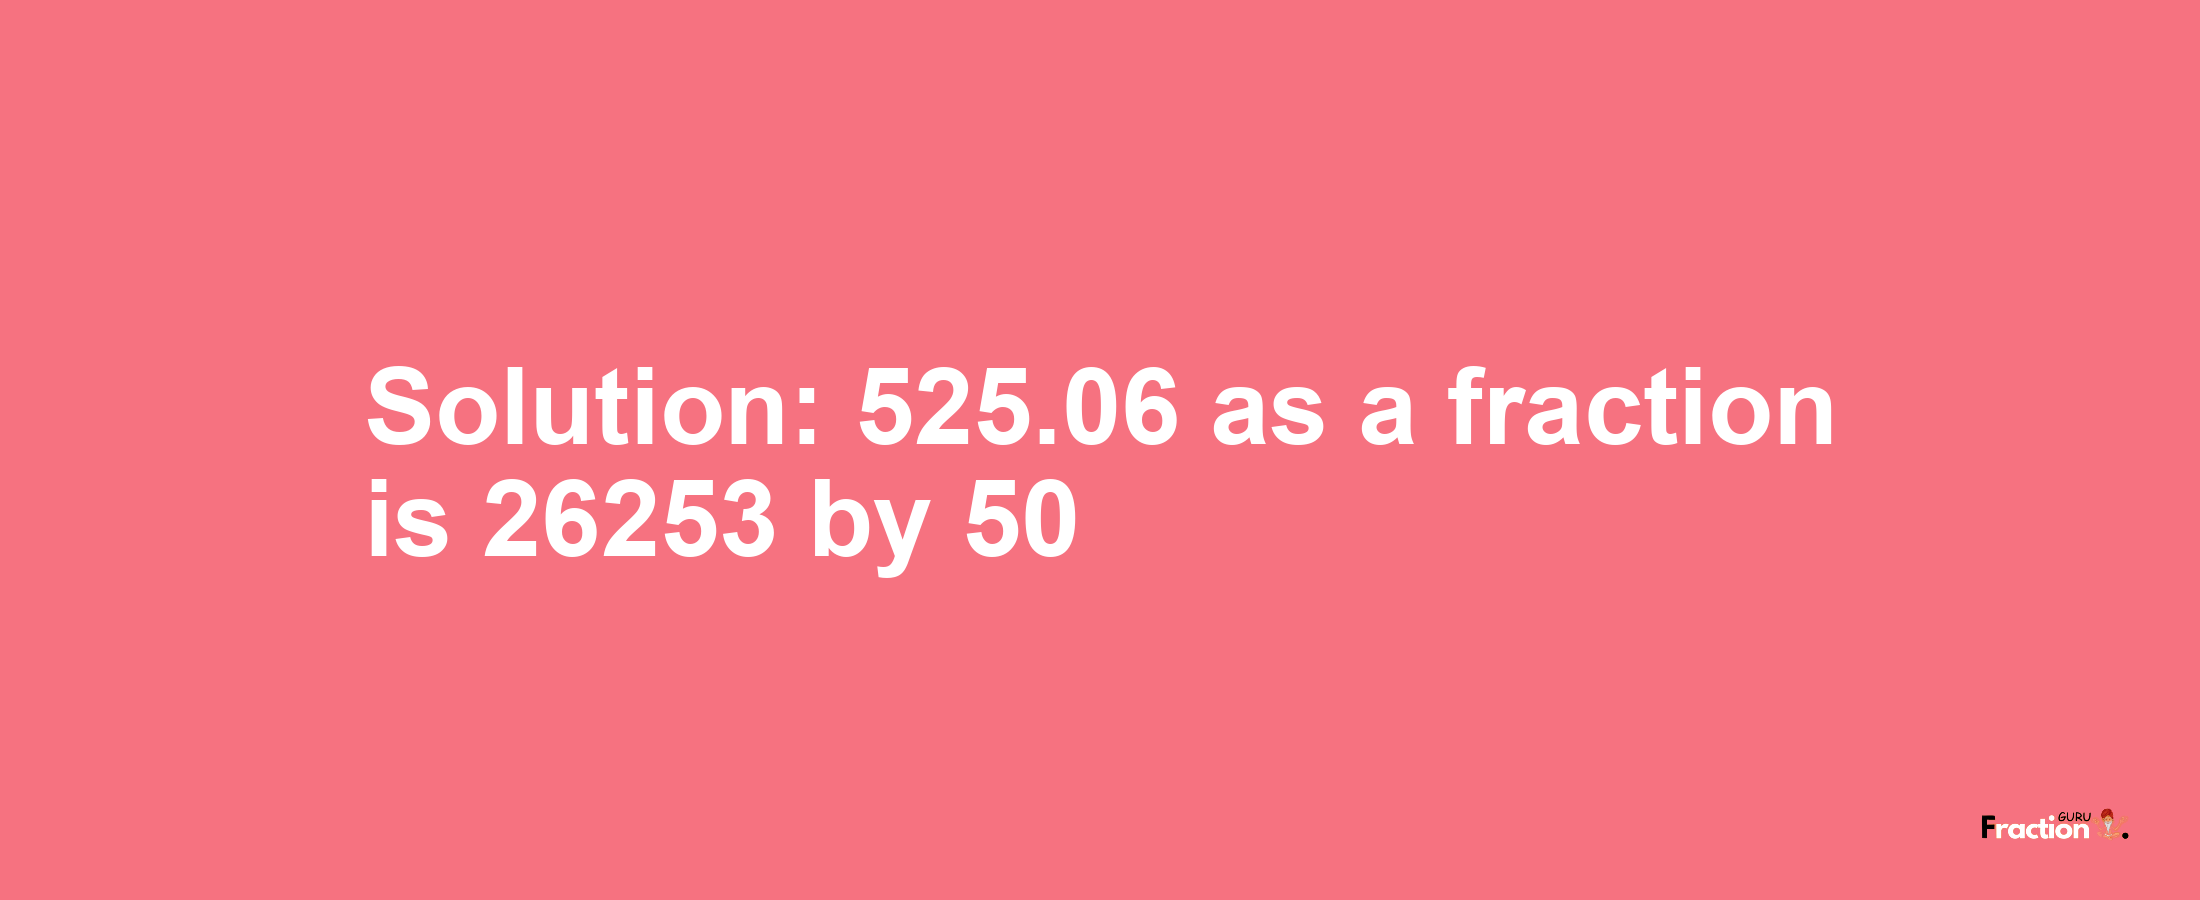 Solution:525.06 as a fraction is 26253/50